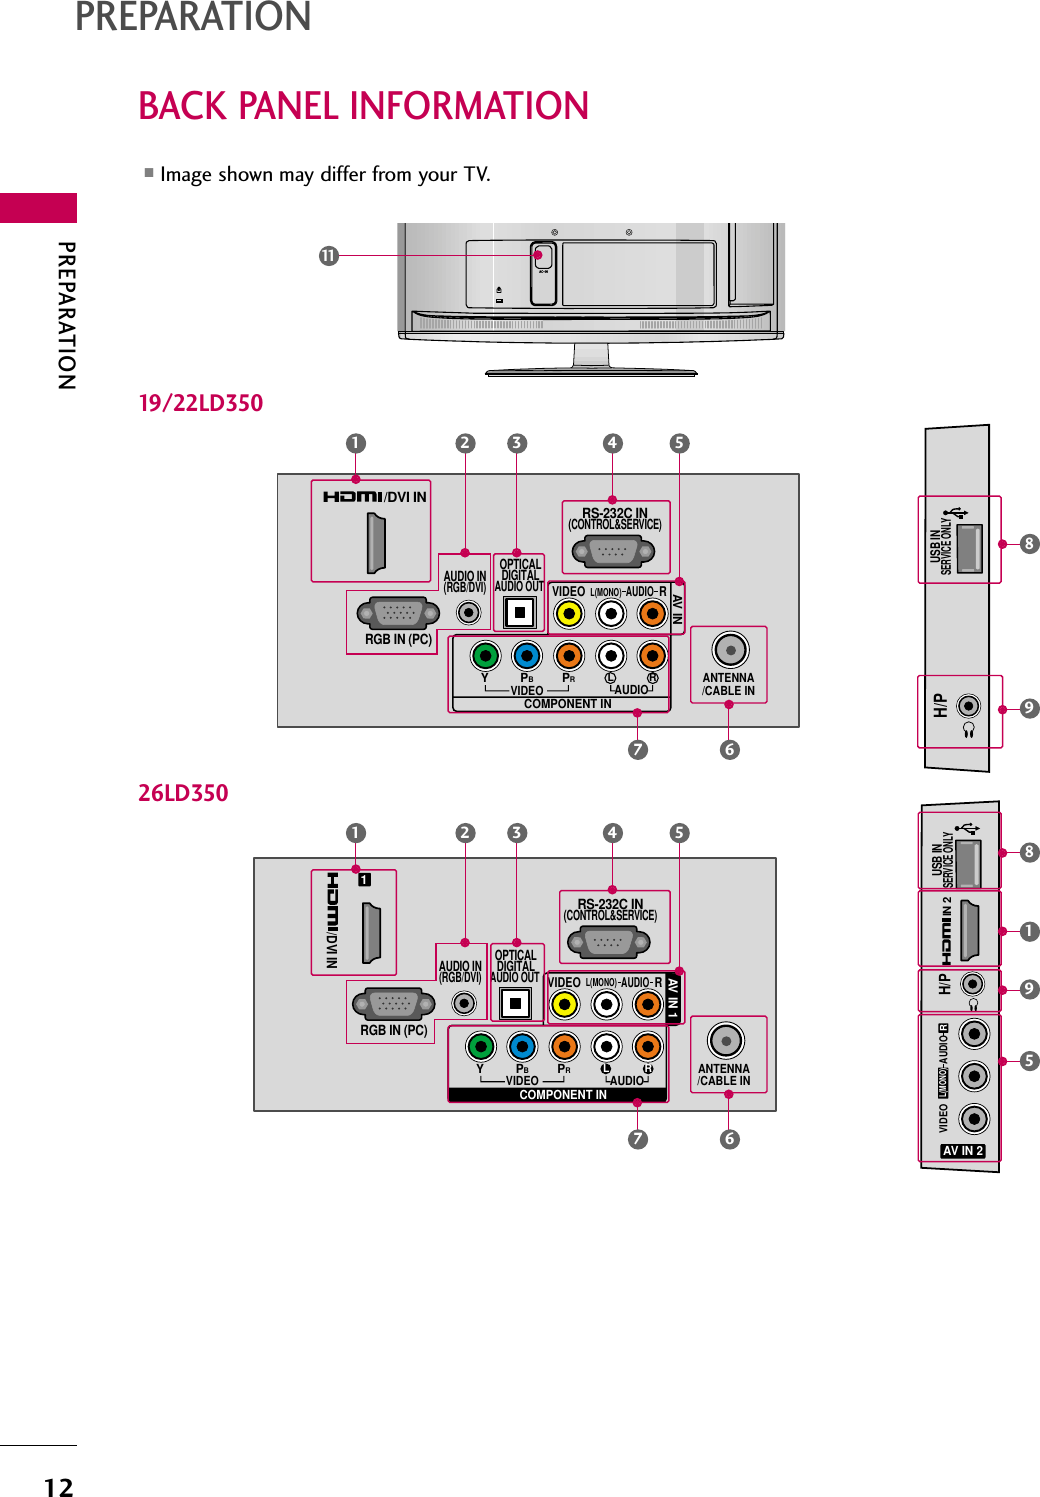 PREPARATION12BACK PANEL INFORMATIONPREPARATIONKAC-INRS-232C IN(CONTROL&amp;SERVICE)ANTENNA/CABLE INVIDEOYPBPRL RAUDIORGB IN (PC)/DVI INAV INVIDEOAUDIORL(MONO)COMPONENT INOPTICALDIGITALAUDIO OUT AUDIO IN(RGB/DVI)1 419/22LD3507 6■Image shown may differ from your TV.USB INSERVICE ONLYH/P2 3 5IN 2VIDEOAUDIOL(MONO)RH/PUSB INSERVICE ONLYAV IN 2189598111/DVI INRS-232C IN(CONTROL&amp;SERVICE)ANTENNA/CABLE INVIDEOYPBPRL RAUDIORGB IN (PC)VIDEOAUDIORL(MONO)COMPONENT INOPTICALDIGITALAUDIO OUT AUDIO IN(RGB/DVI)AV IN 11 426LD3507 62 3 5